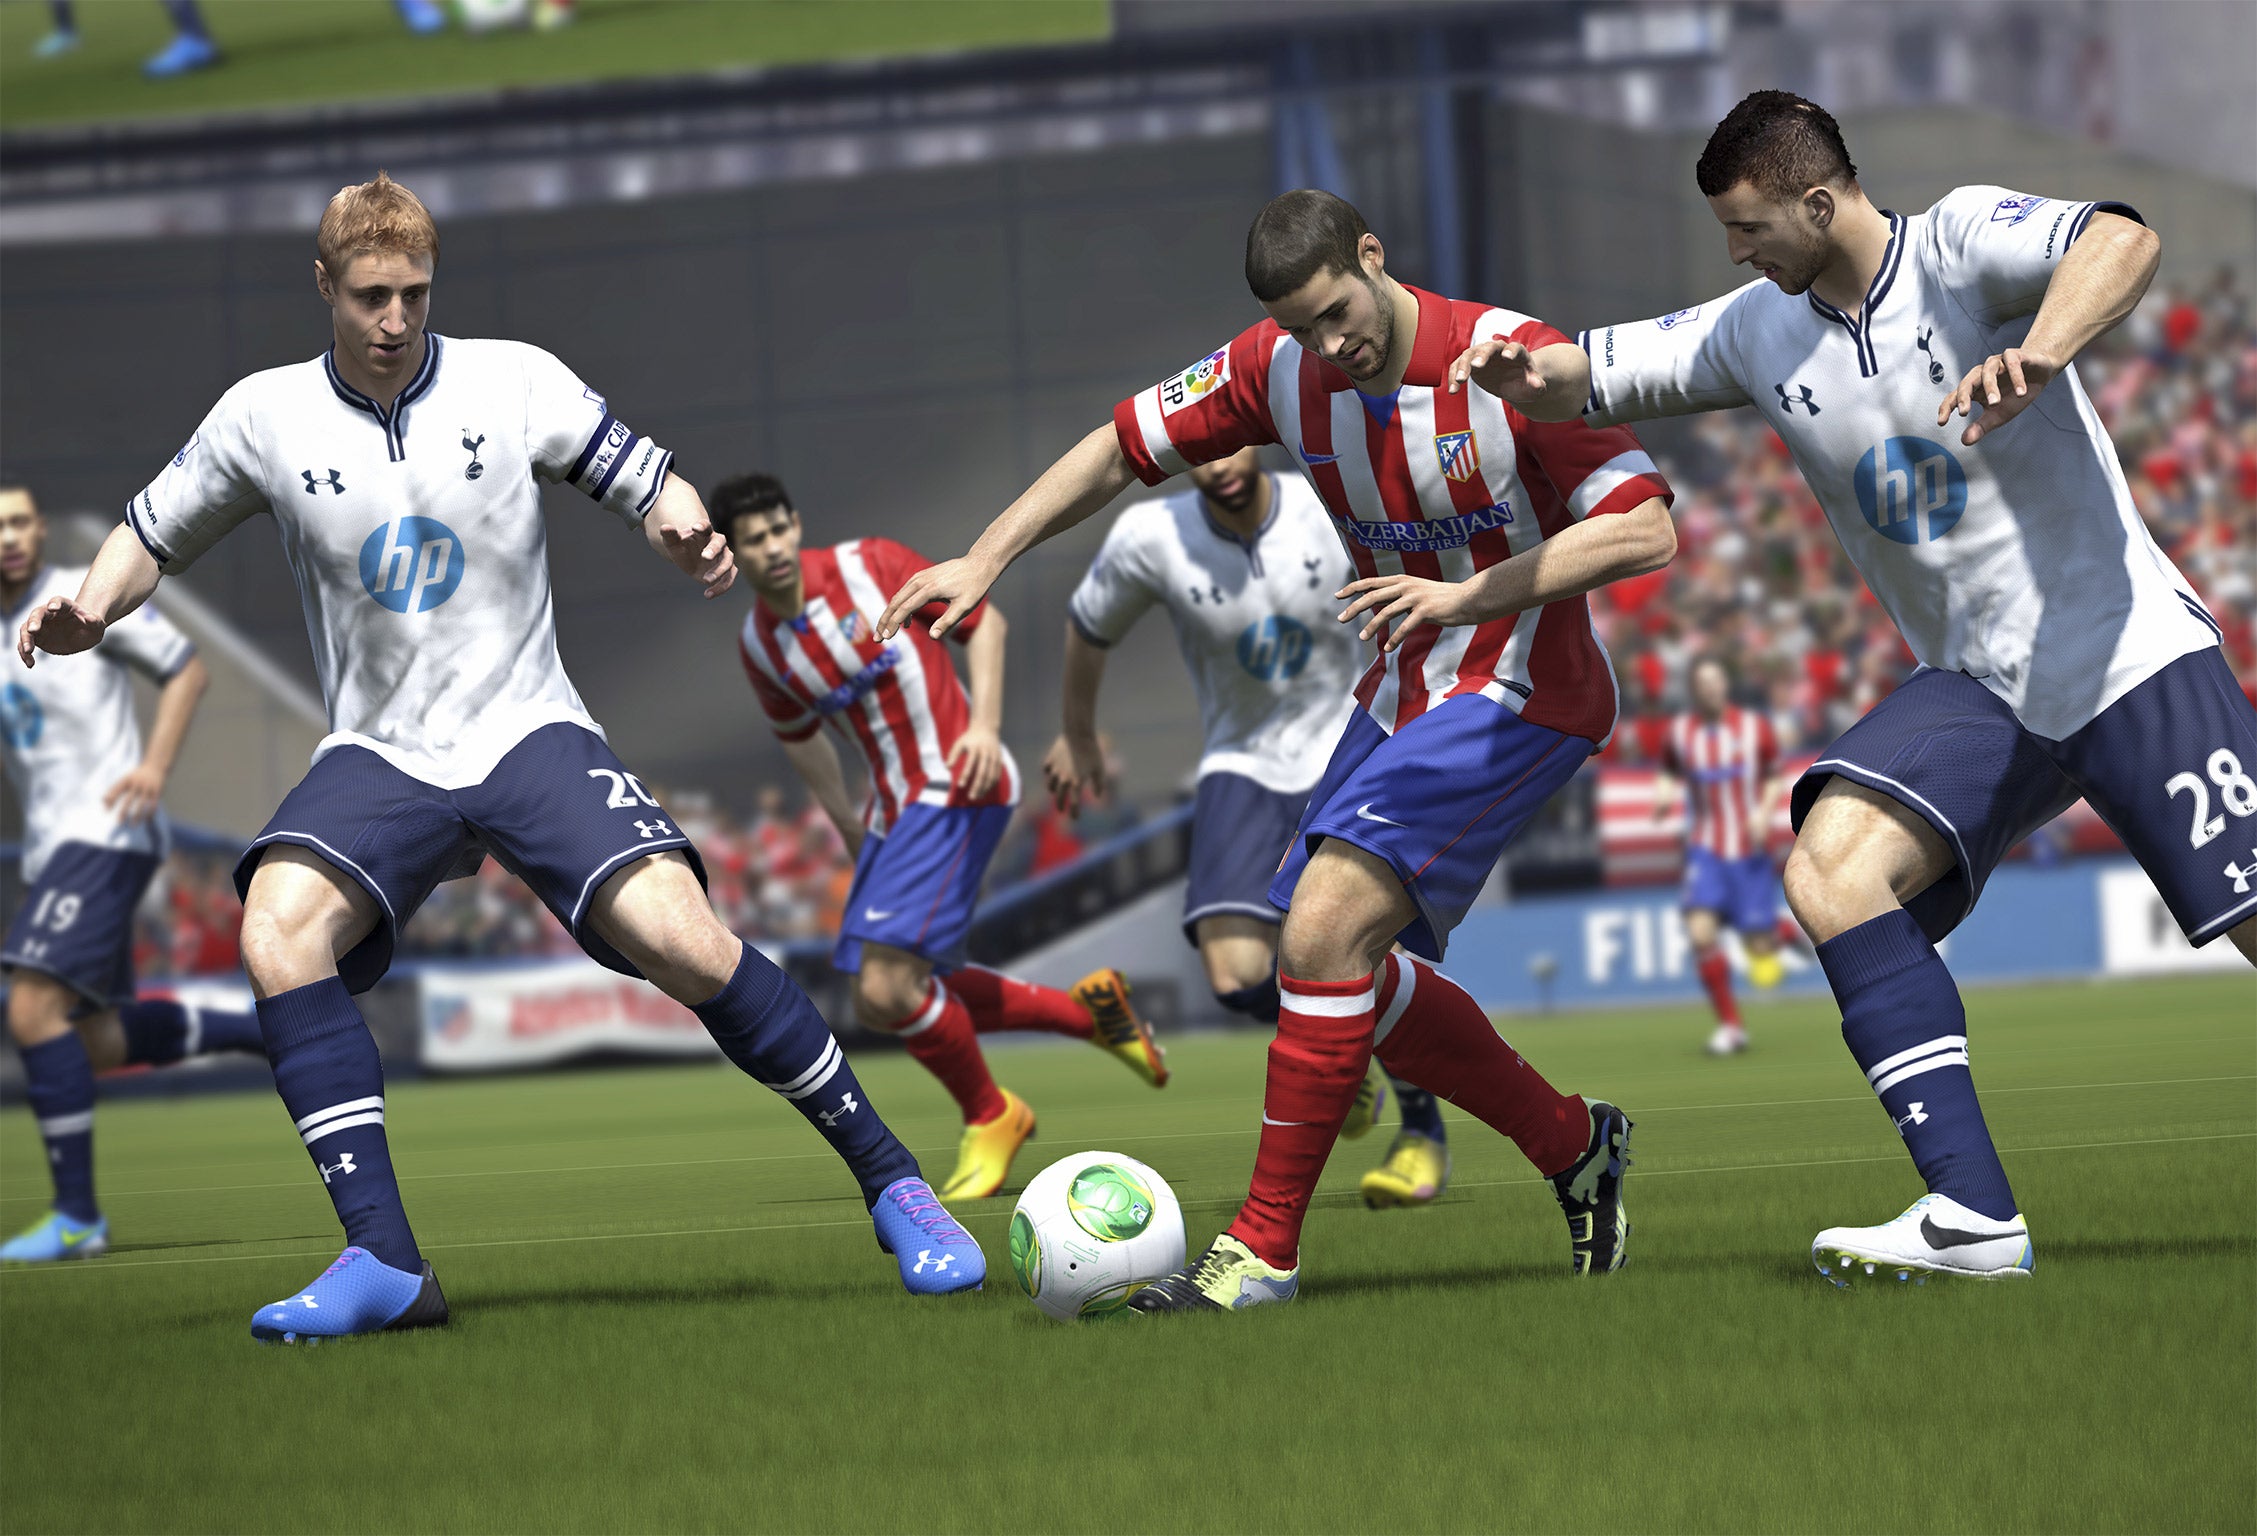 In the game: EA's 'Fifa 14' is very popular with online scouts